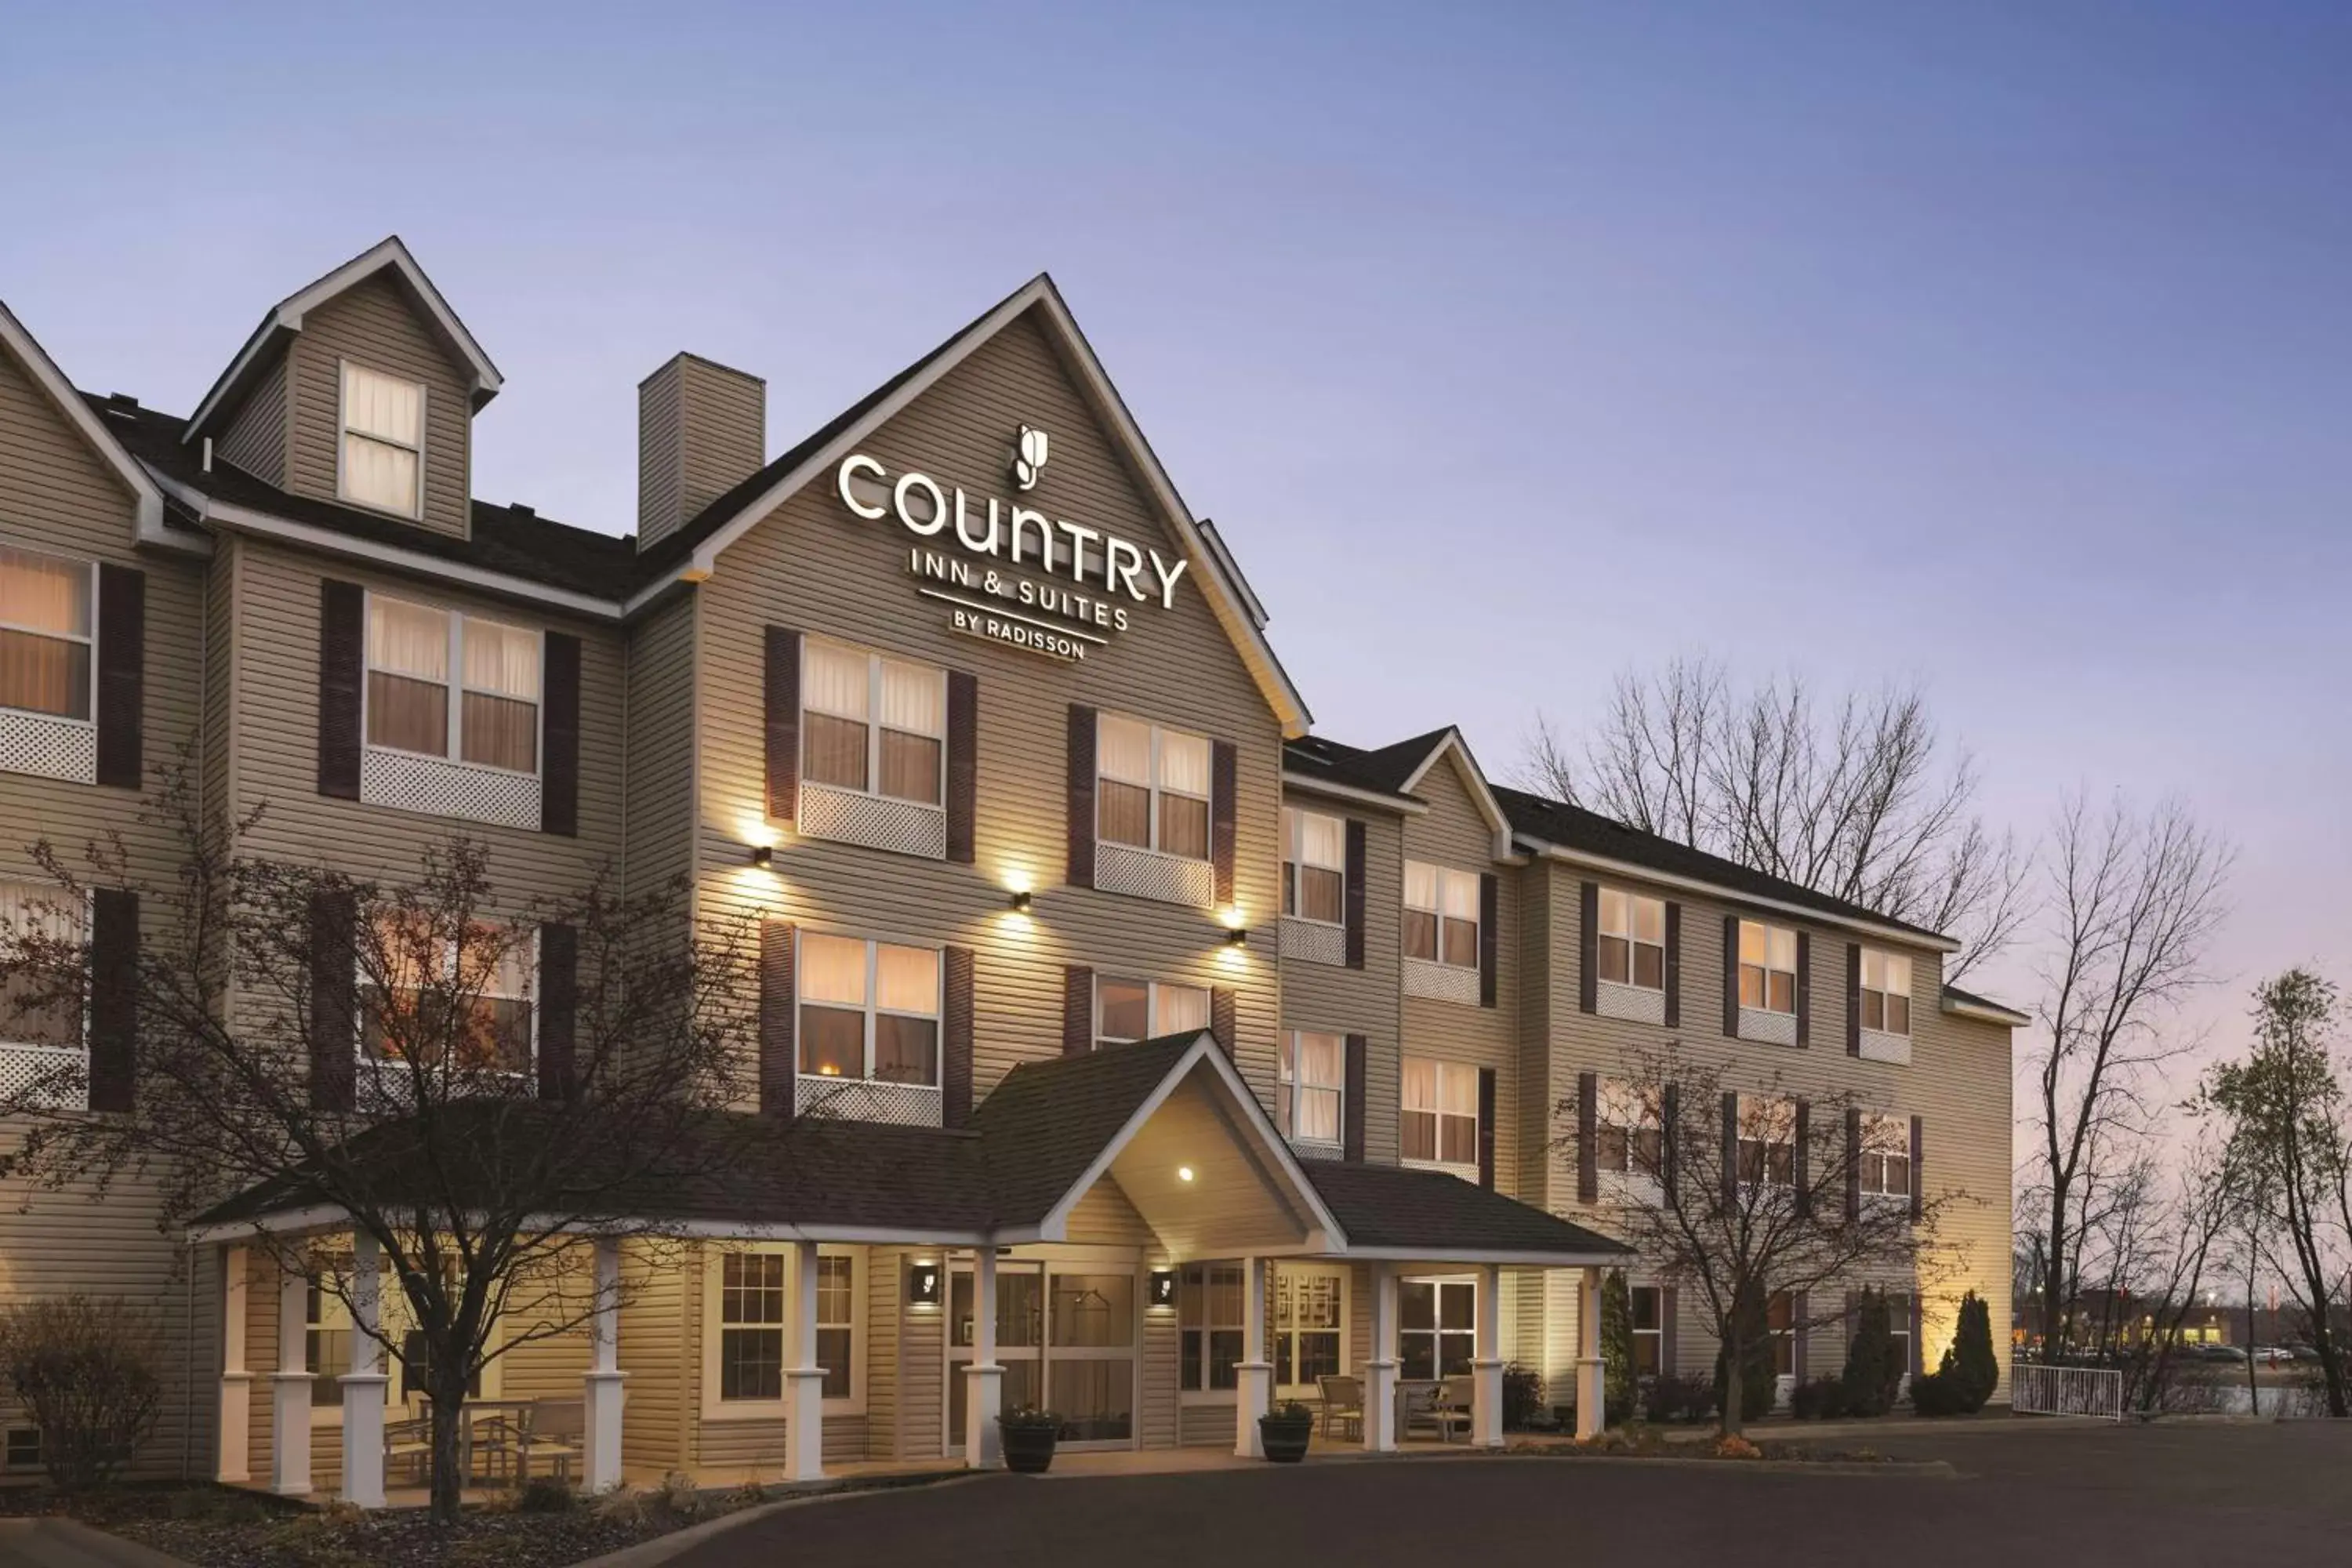 Property Building in Country Inn & Suites by Radisson, Forest Lake, MN